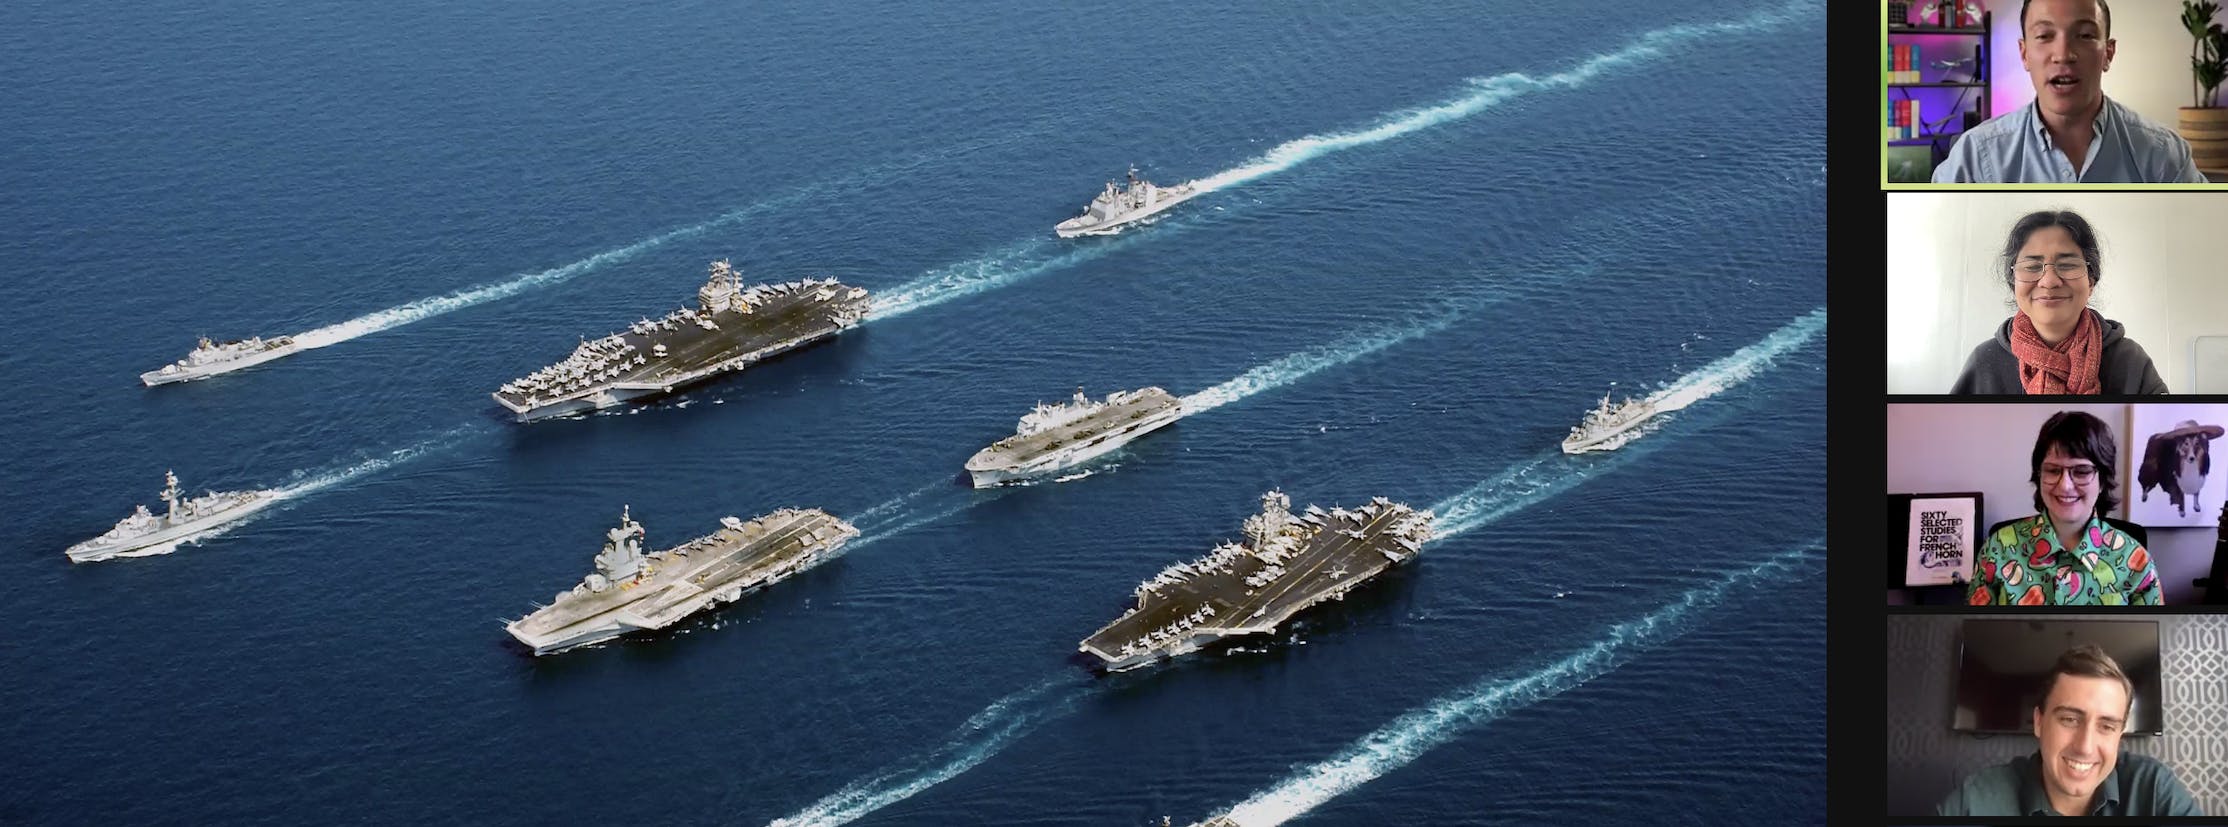 image of fleet of ships (David Perell, Laila, Rebecca and Will on the sidebar)